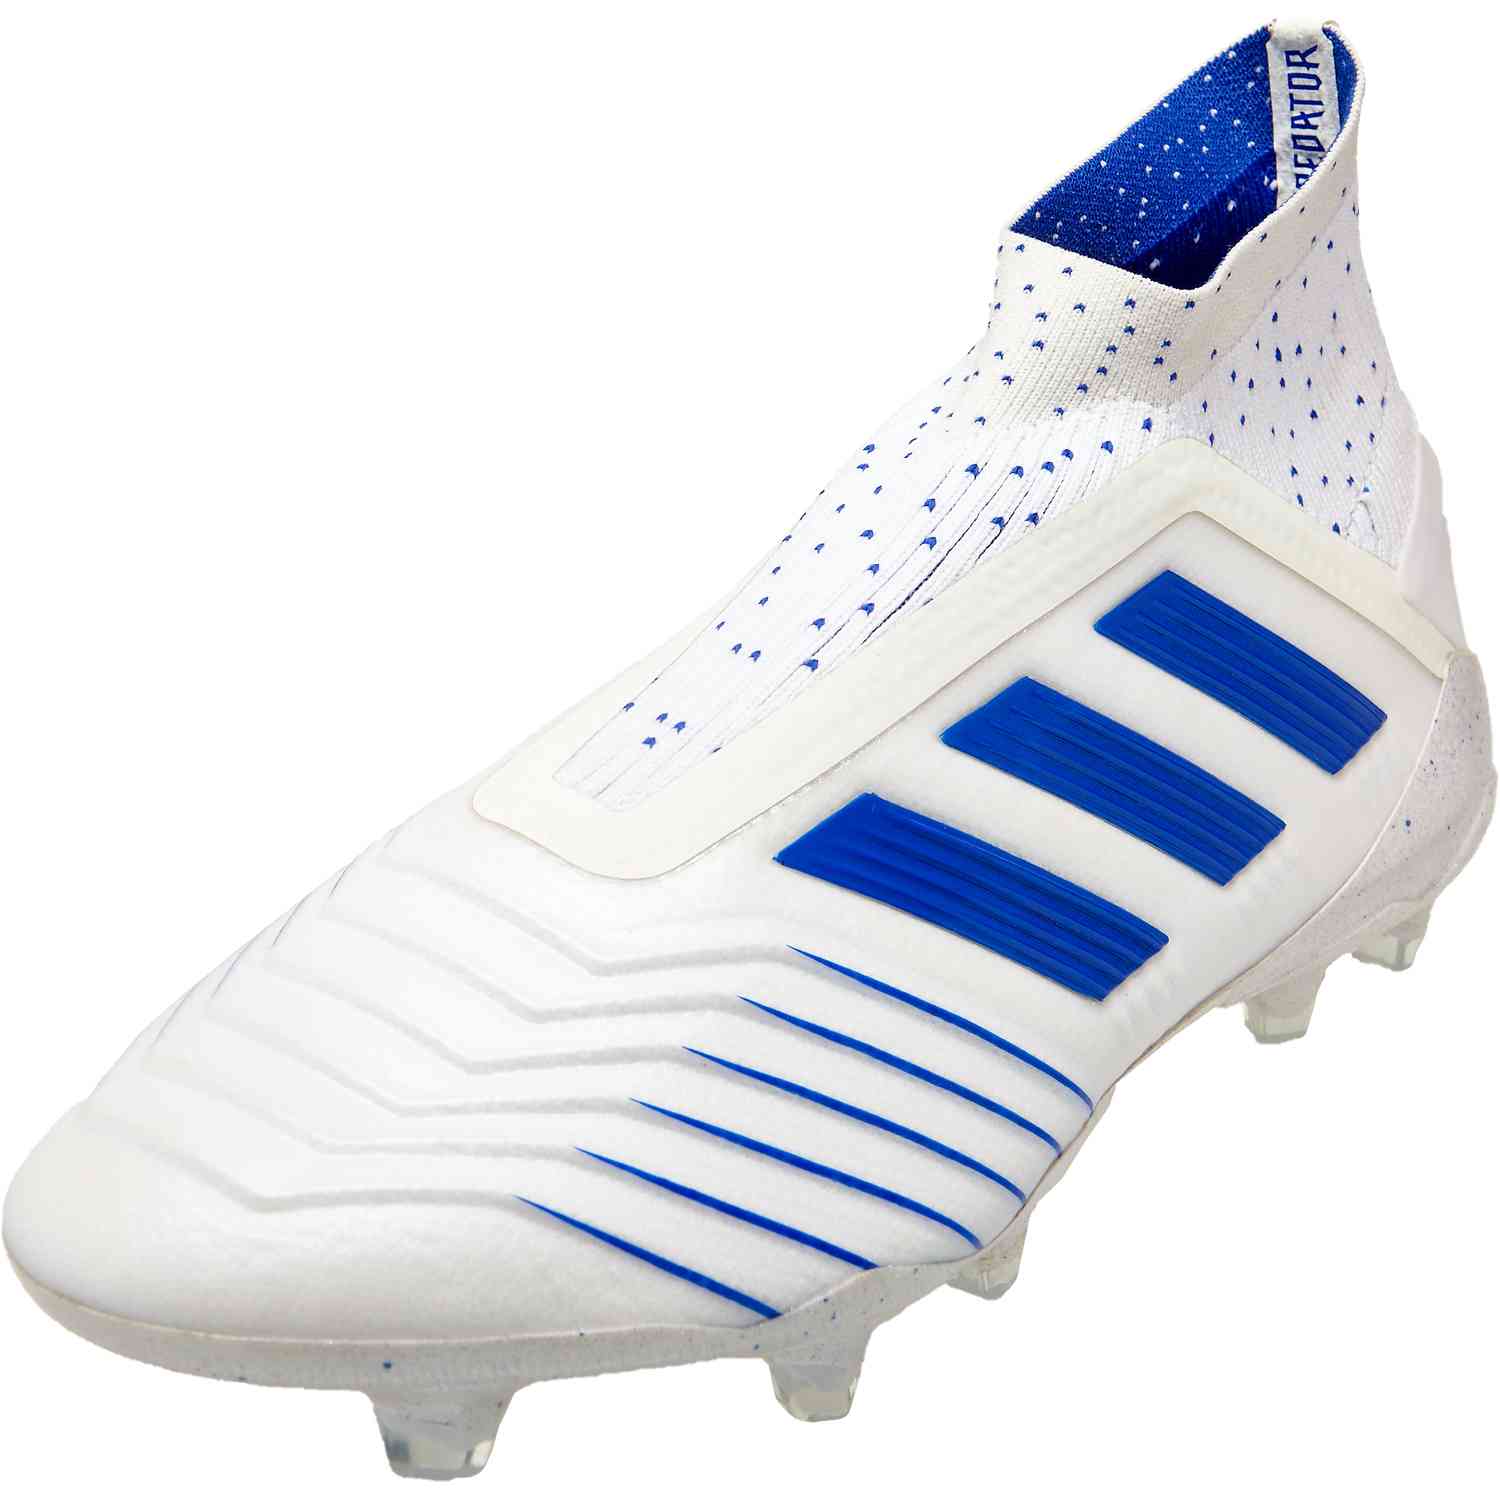 predator soccer cleats youth